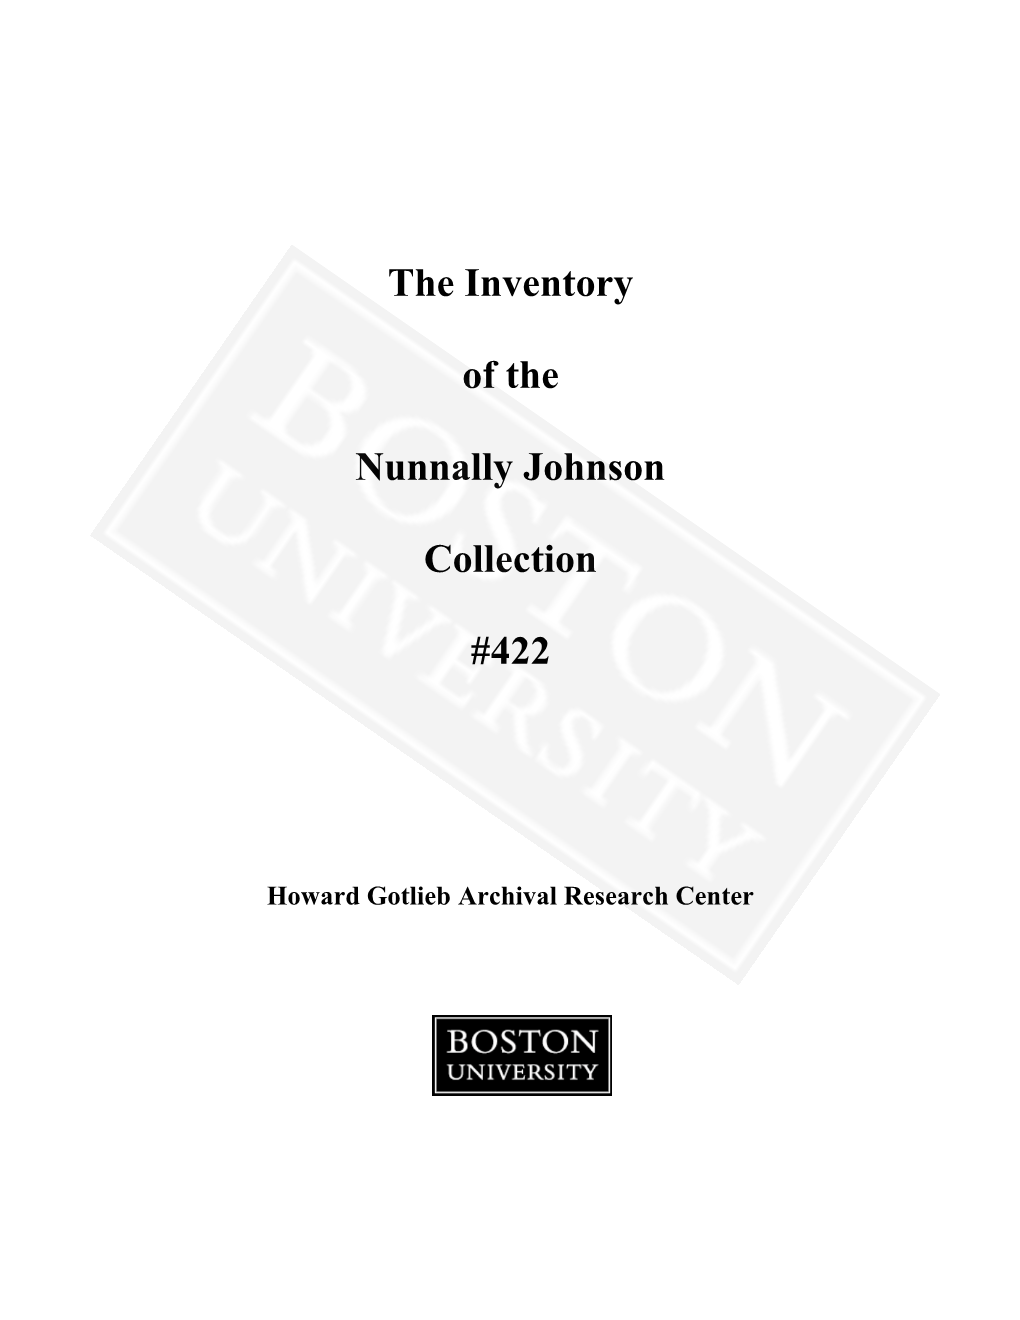 The Inventory of the Nunnally Johnson Collection #422